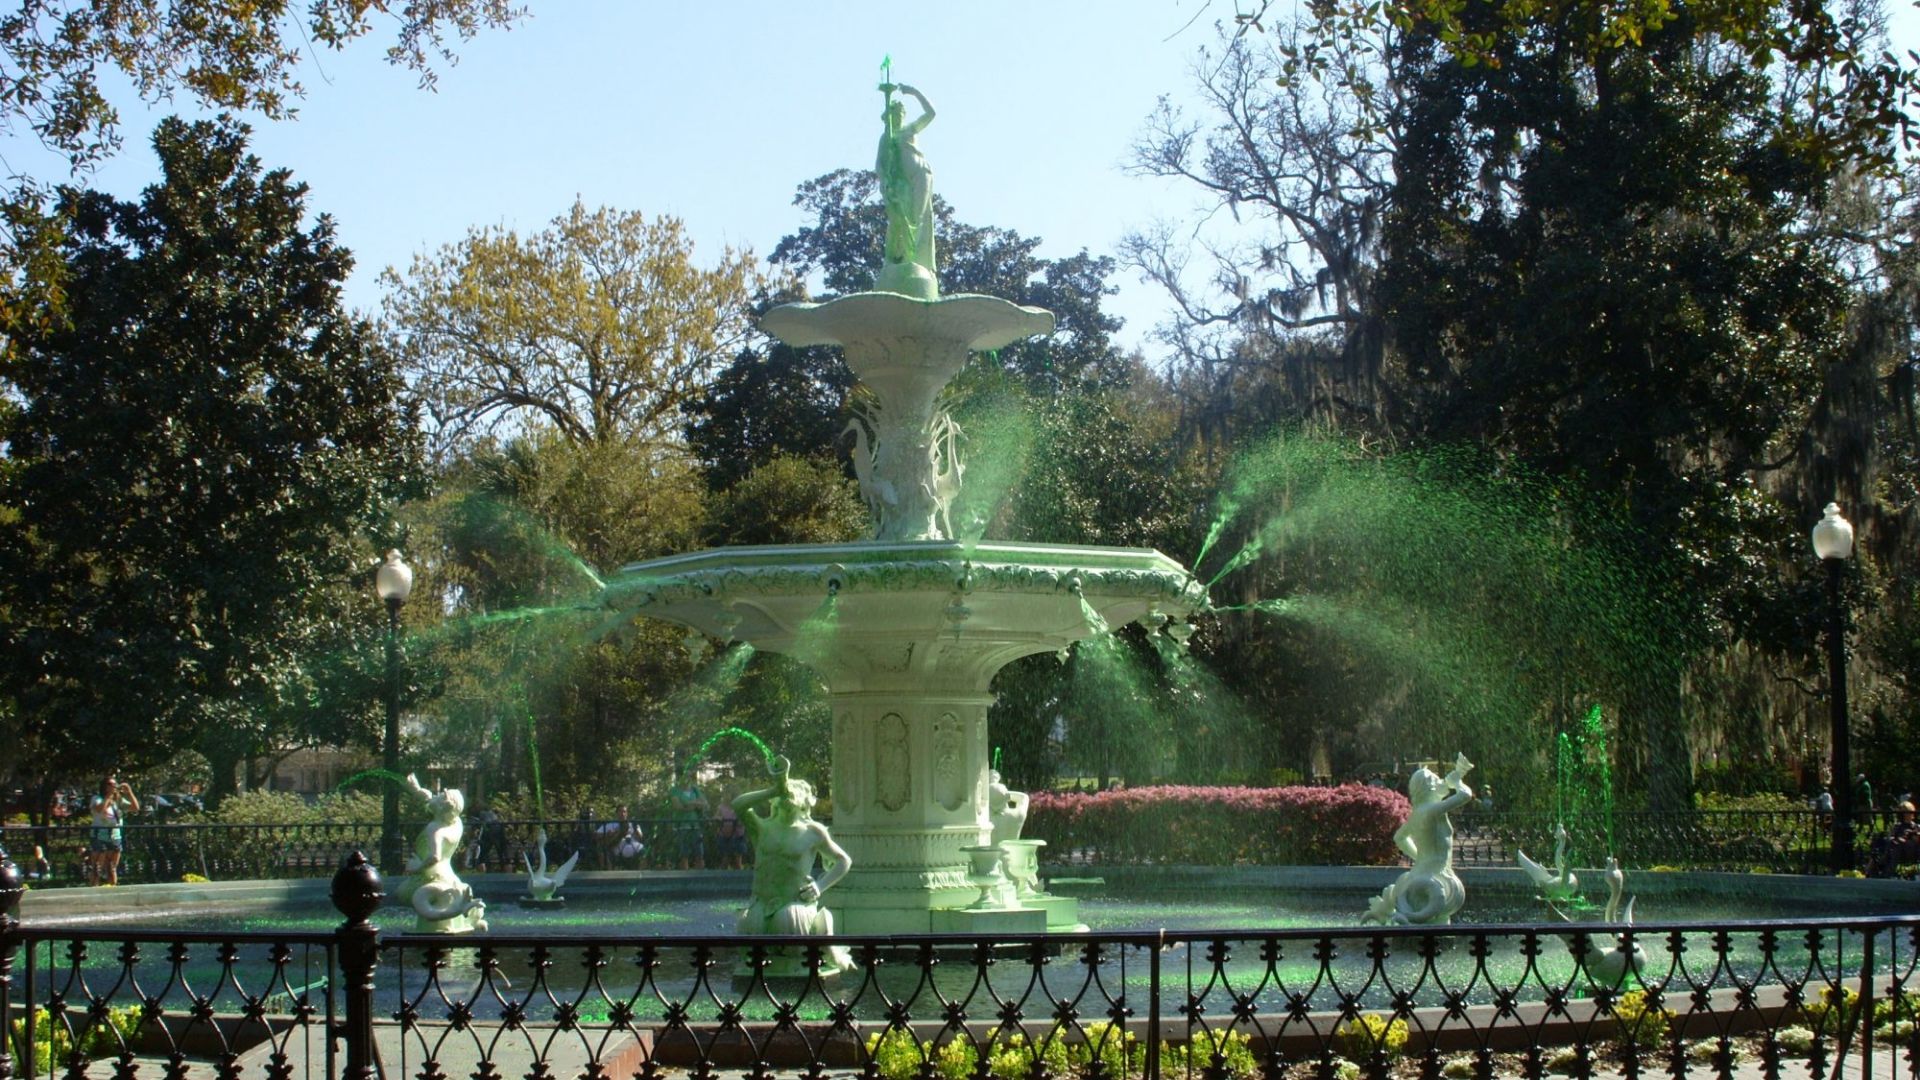 A Fountain With A Statue In The Middle